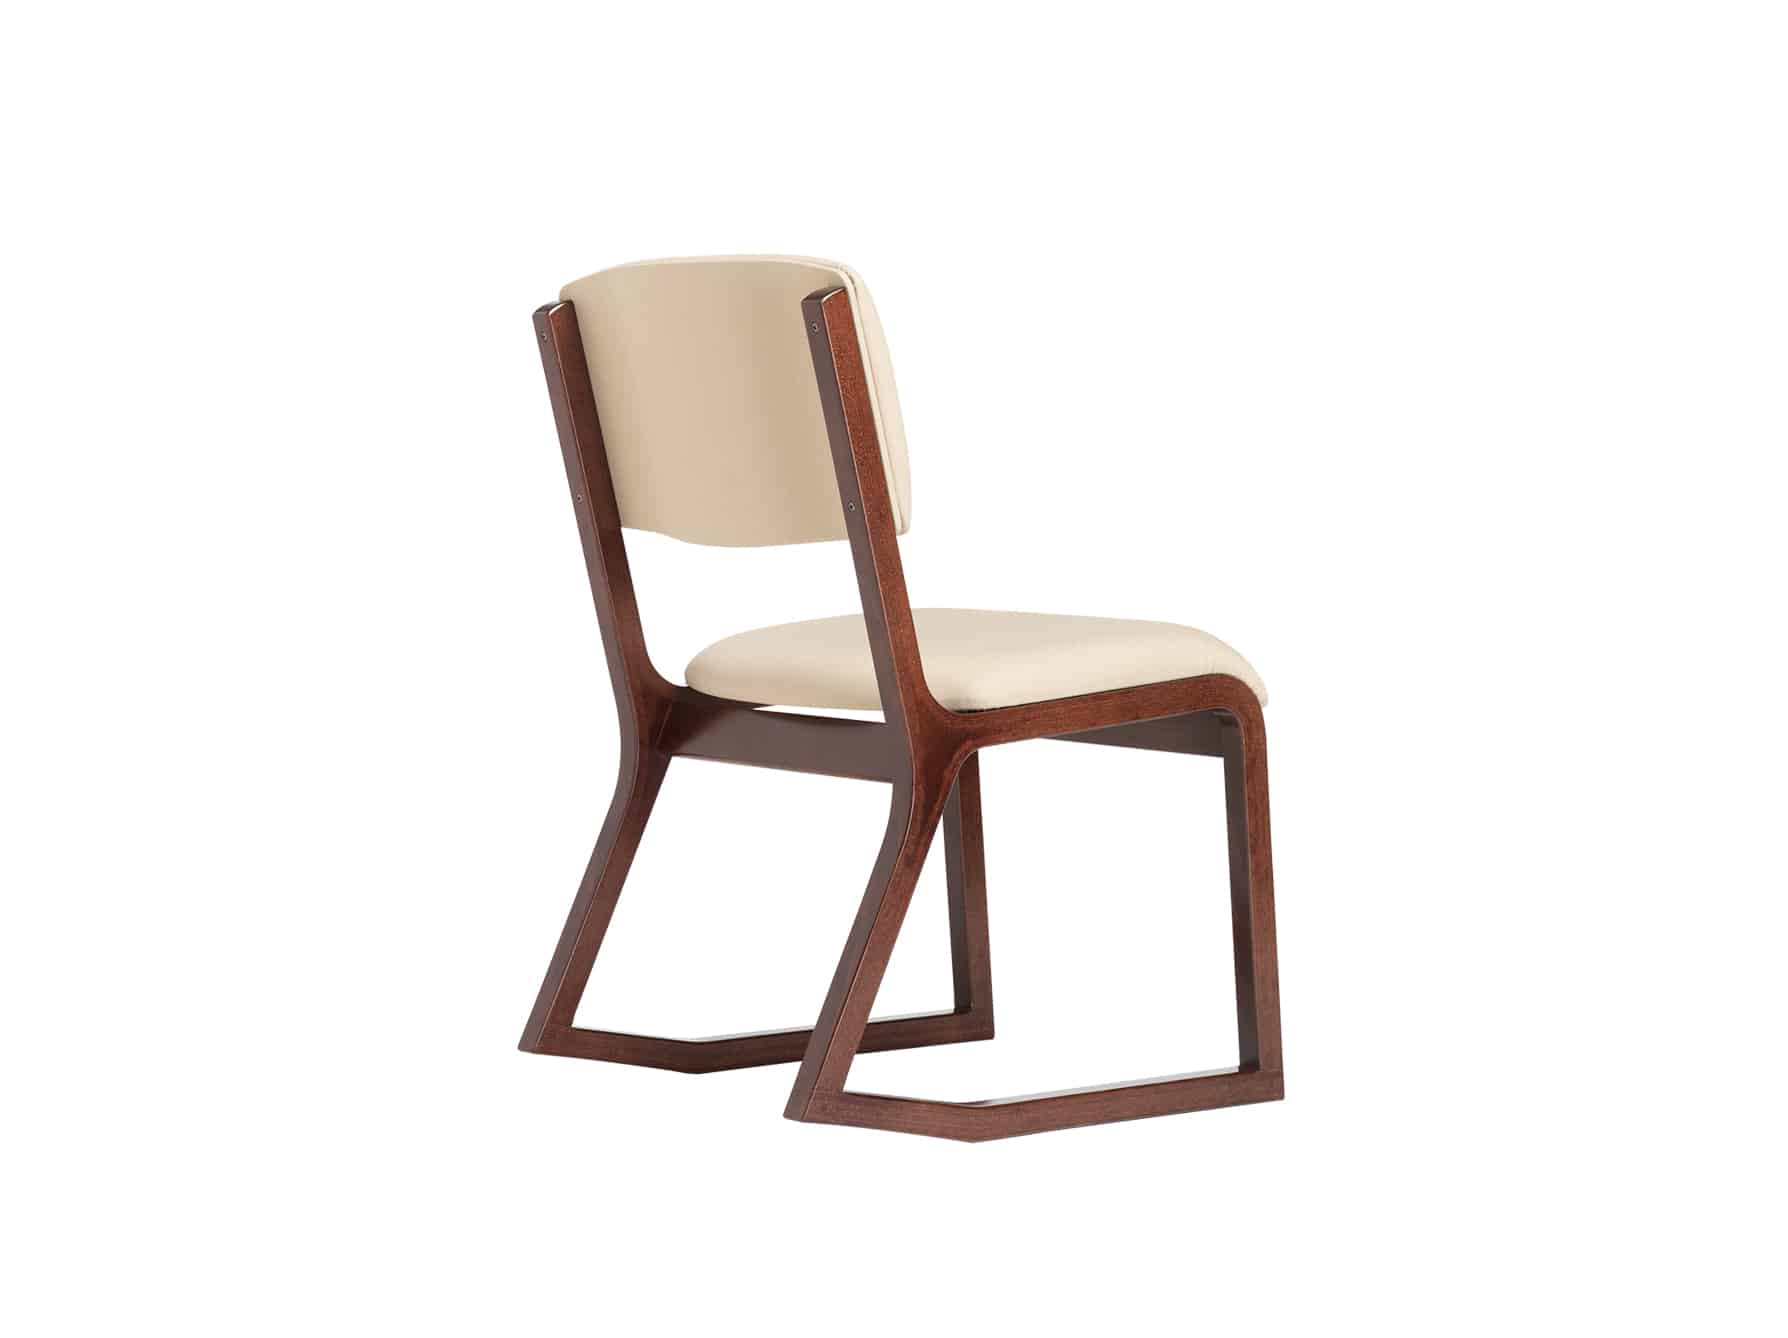 PlyWedge, 2 Position Chair, Upholstered Seat